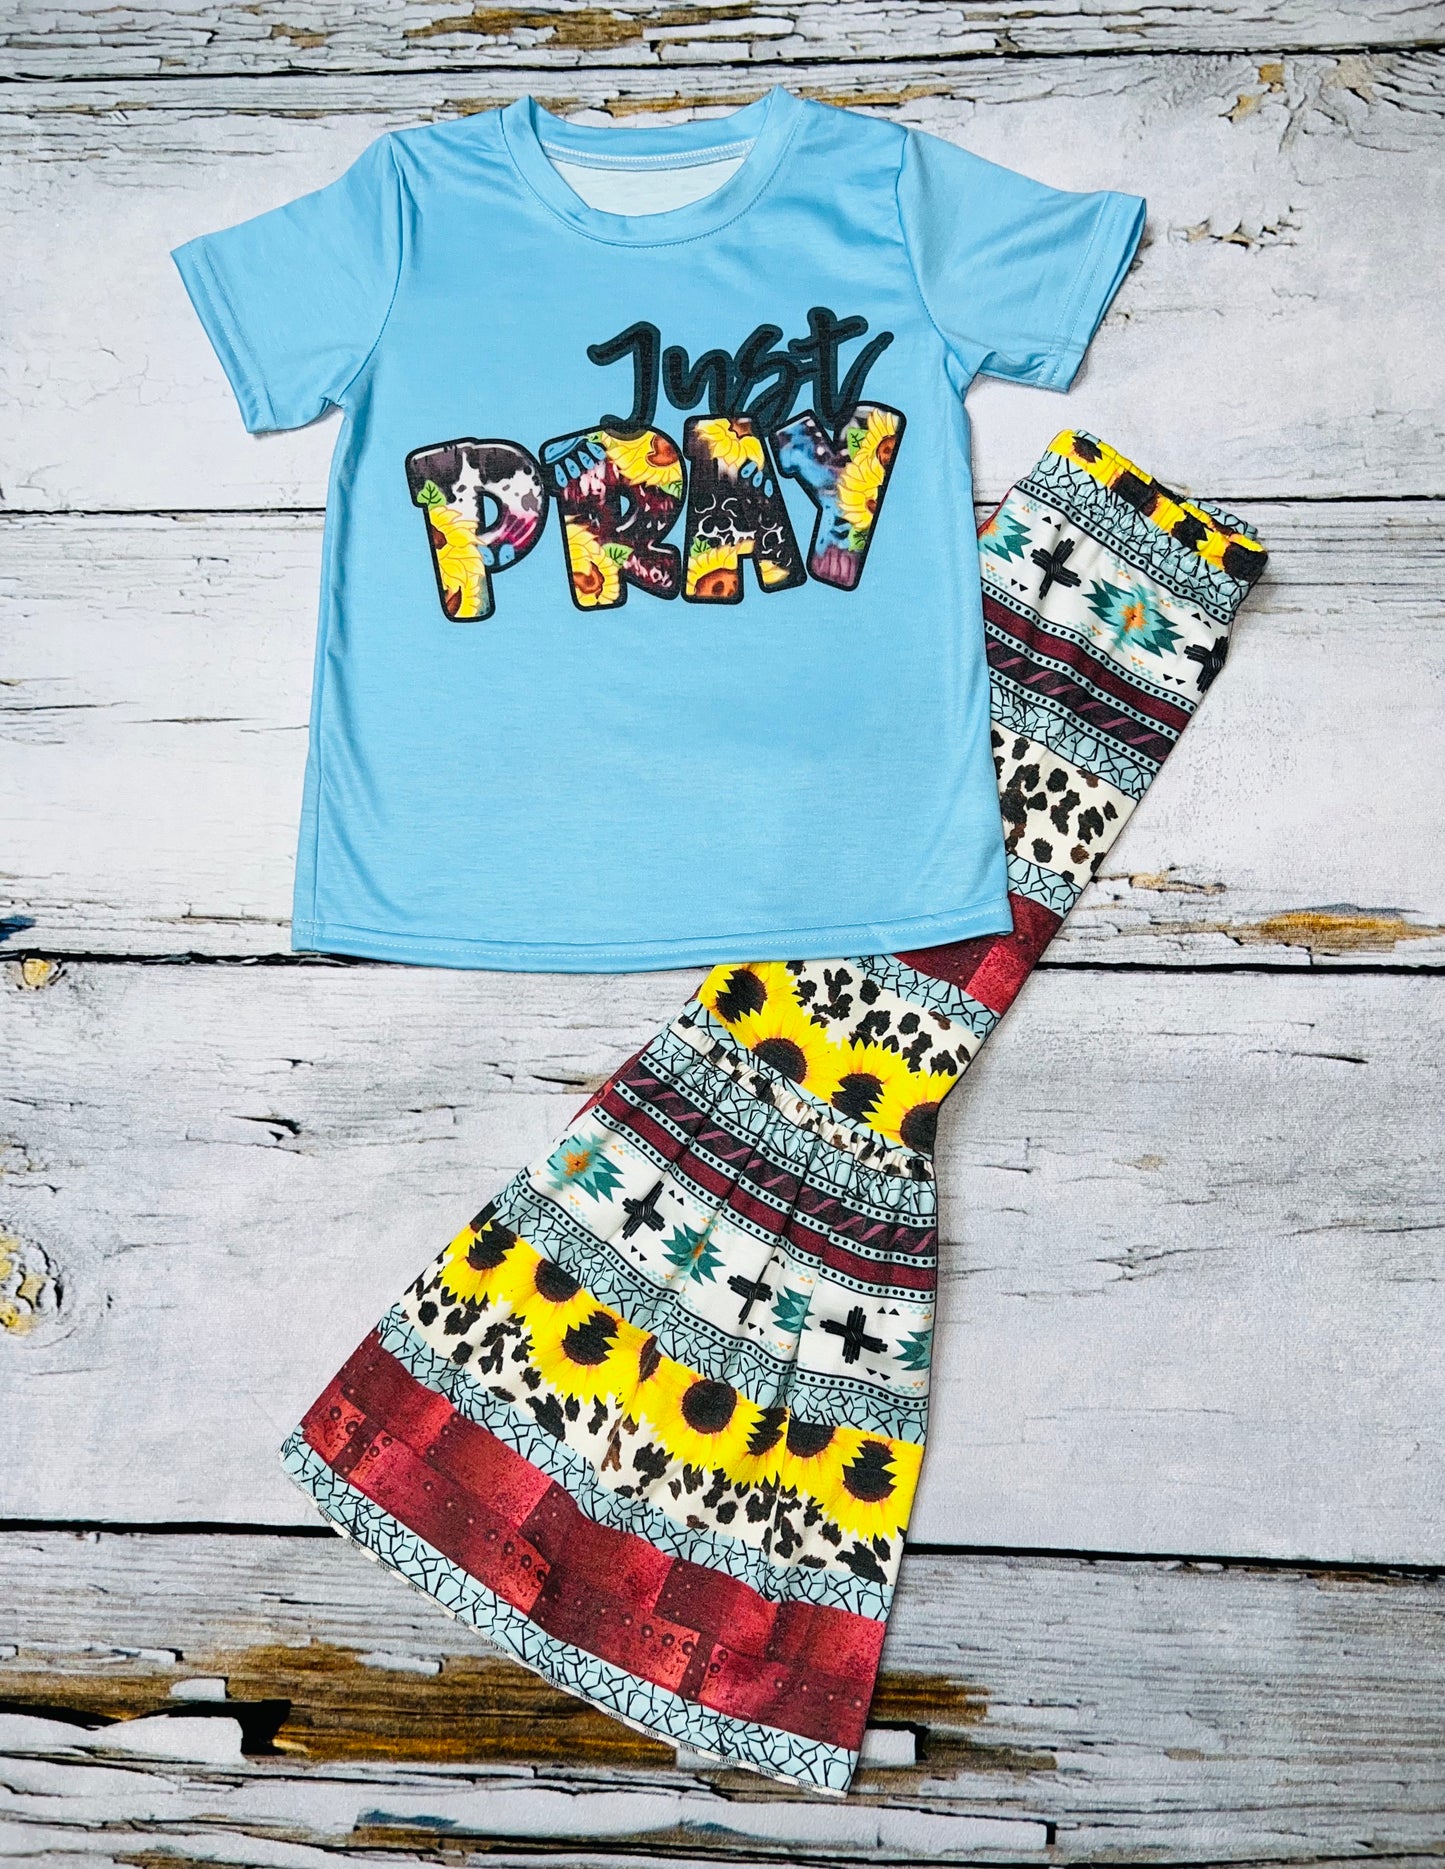 "Just Pray" turquoise short sleeve 2pc set DLH0923-25